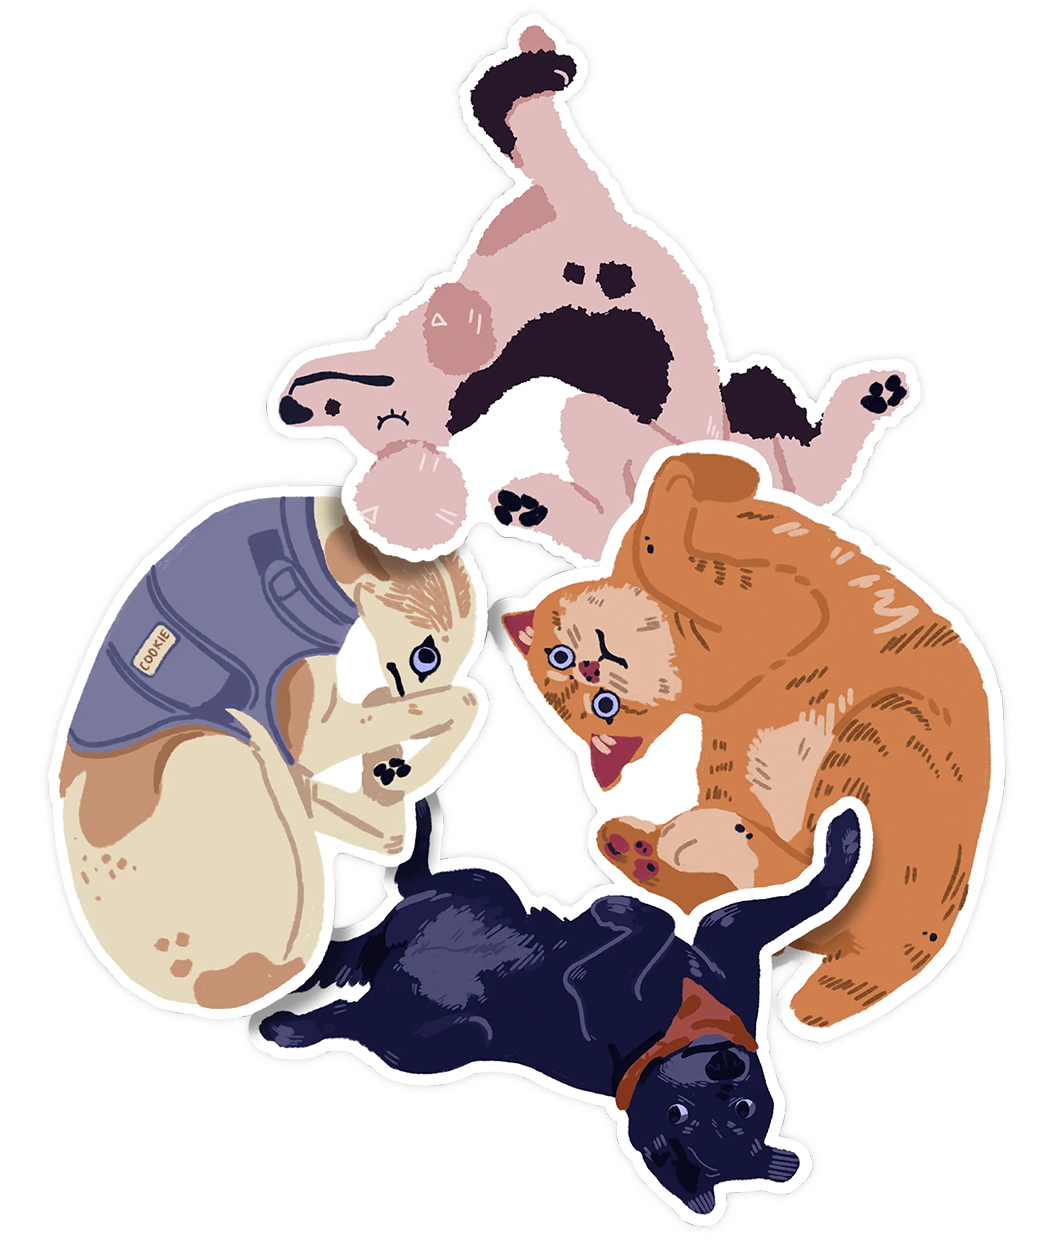 Sticker of an orange tabby cat, a. black small dog with red bandana, a pink poodle with black spots, and a yellow scared looking dog with light brown spots and a blue jacket.